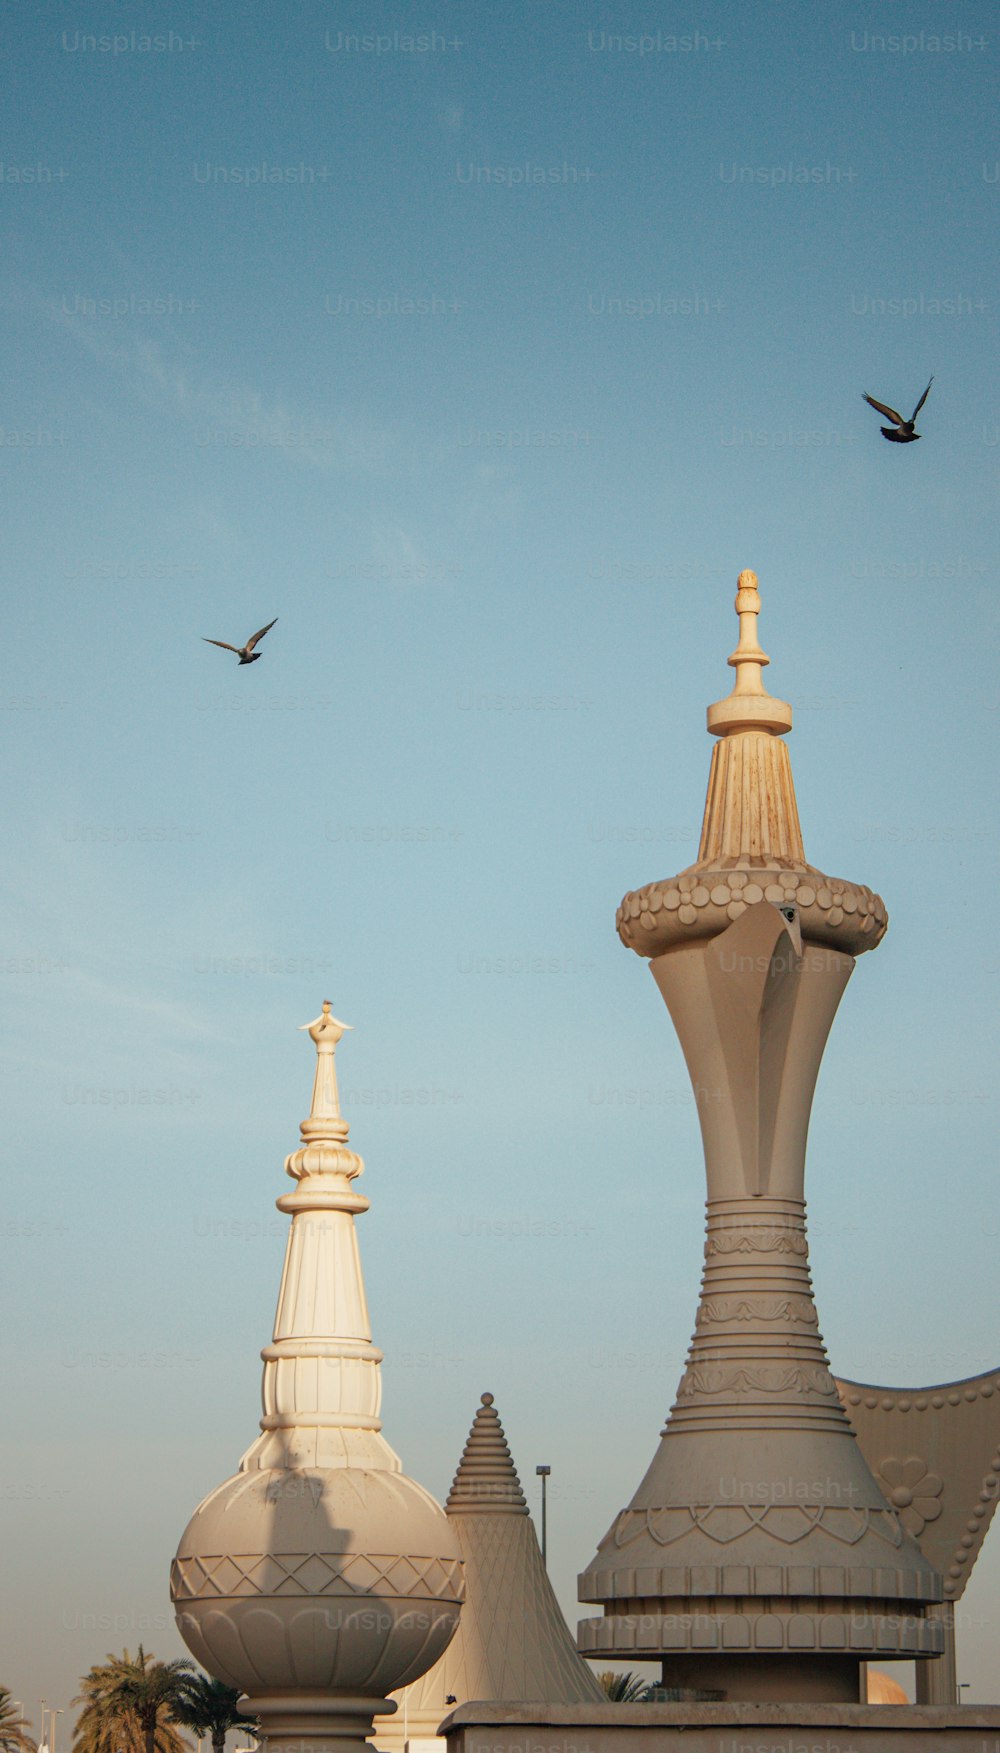 A vertical shot of The Dallah Coffee Pot in Abu Dhabi under the clear sky with a flying bird